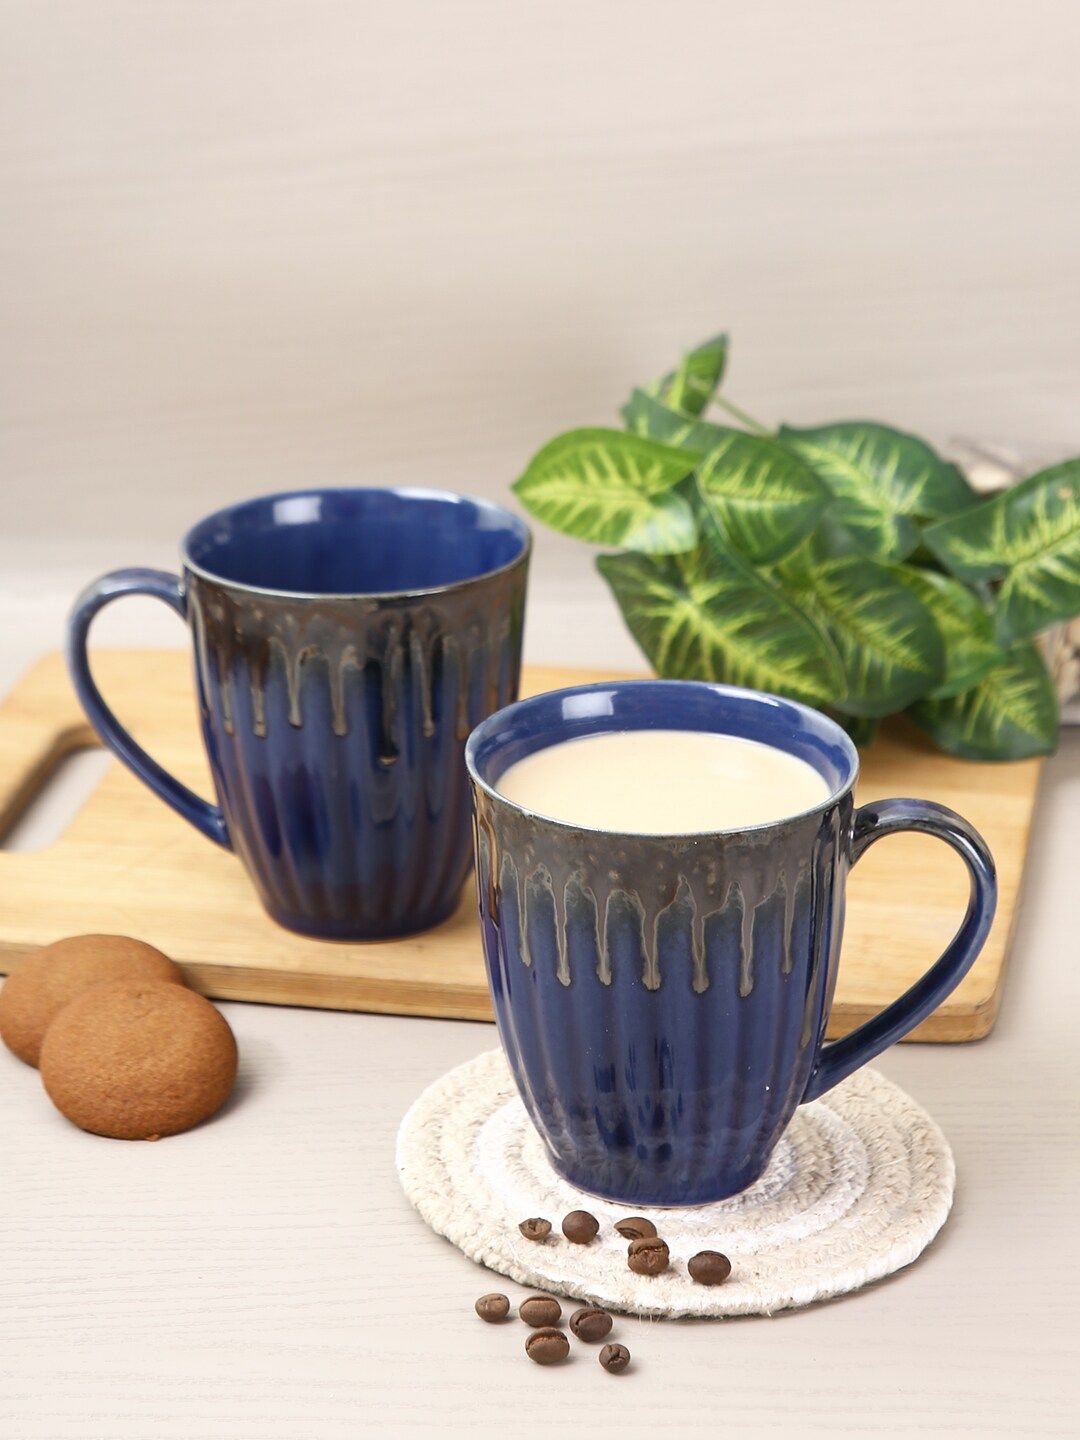 Aapno Rajasthan Navy Blue & Grey Textured Ceramic Glossy Mugs Set of Cups and Mugs Price in India